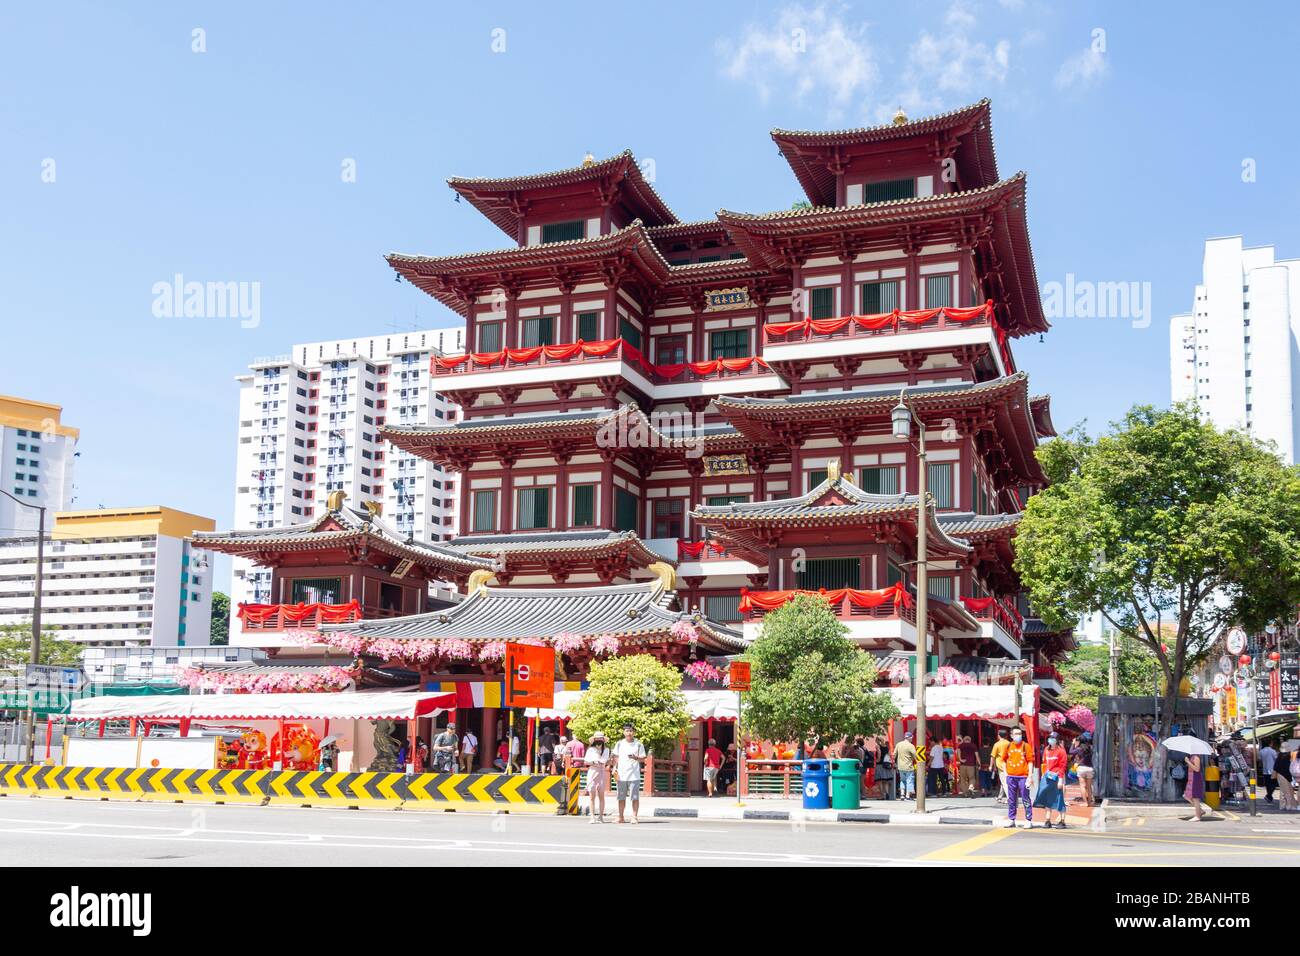 Buddha Tooth Relic Temple, South Bridge Road, Chinatown, Outram District, Central Area, Singapore Island (Pulau Ujong), Singapore Stock Photo